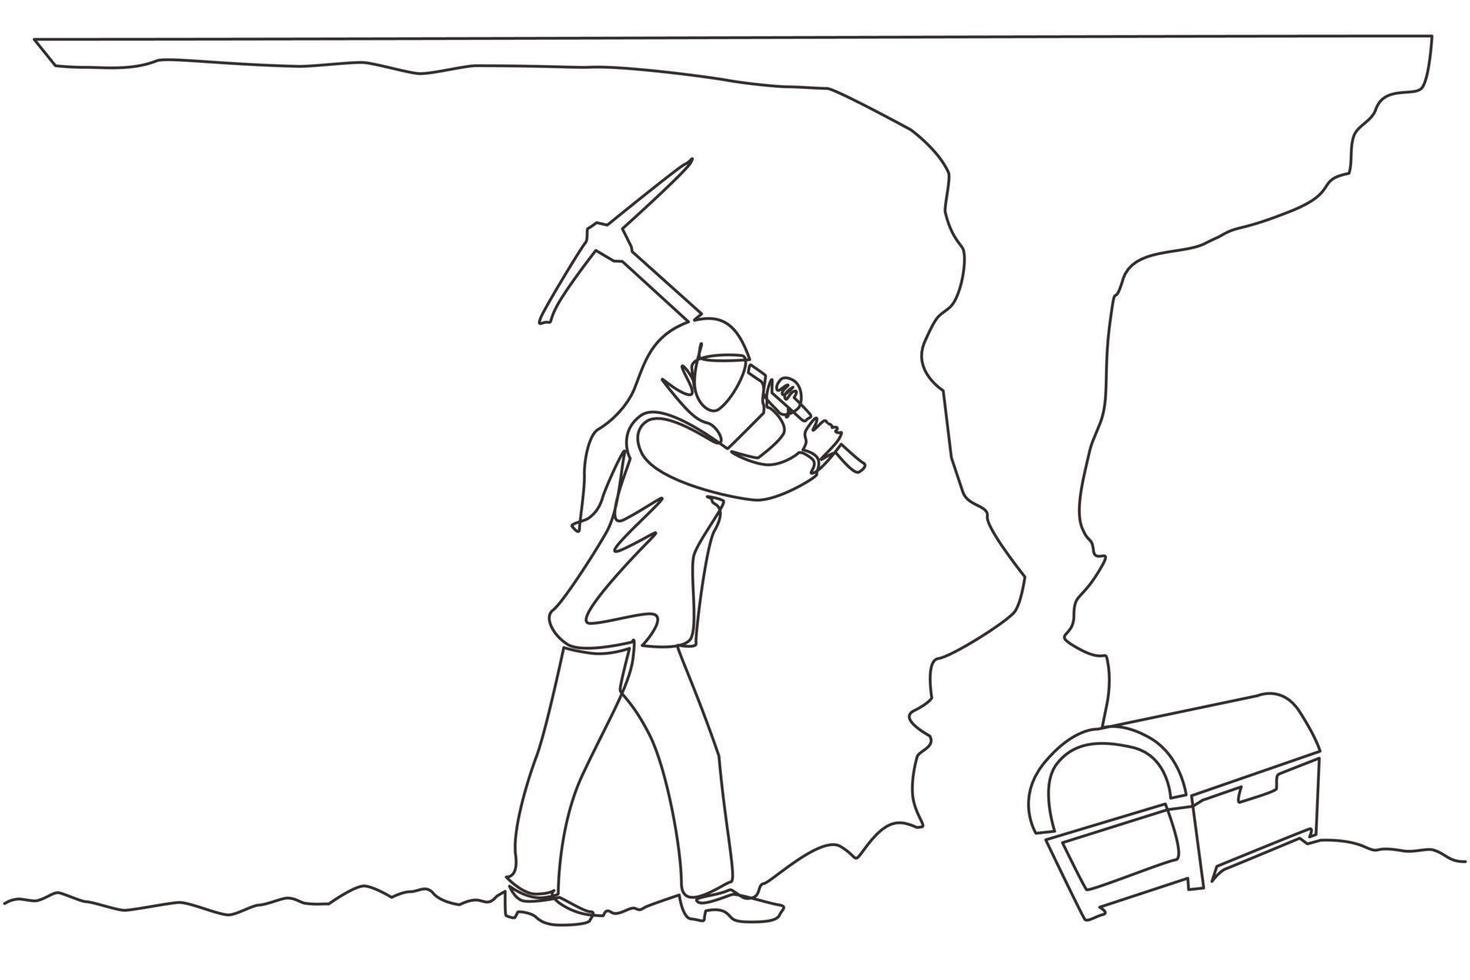 Continuous one line drawing Arabian businesswoman digging with pickaxe looking for hidden treasures. Woman digging and mining for treasure chest in underground tunnel. Single line draw design vector